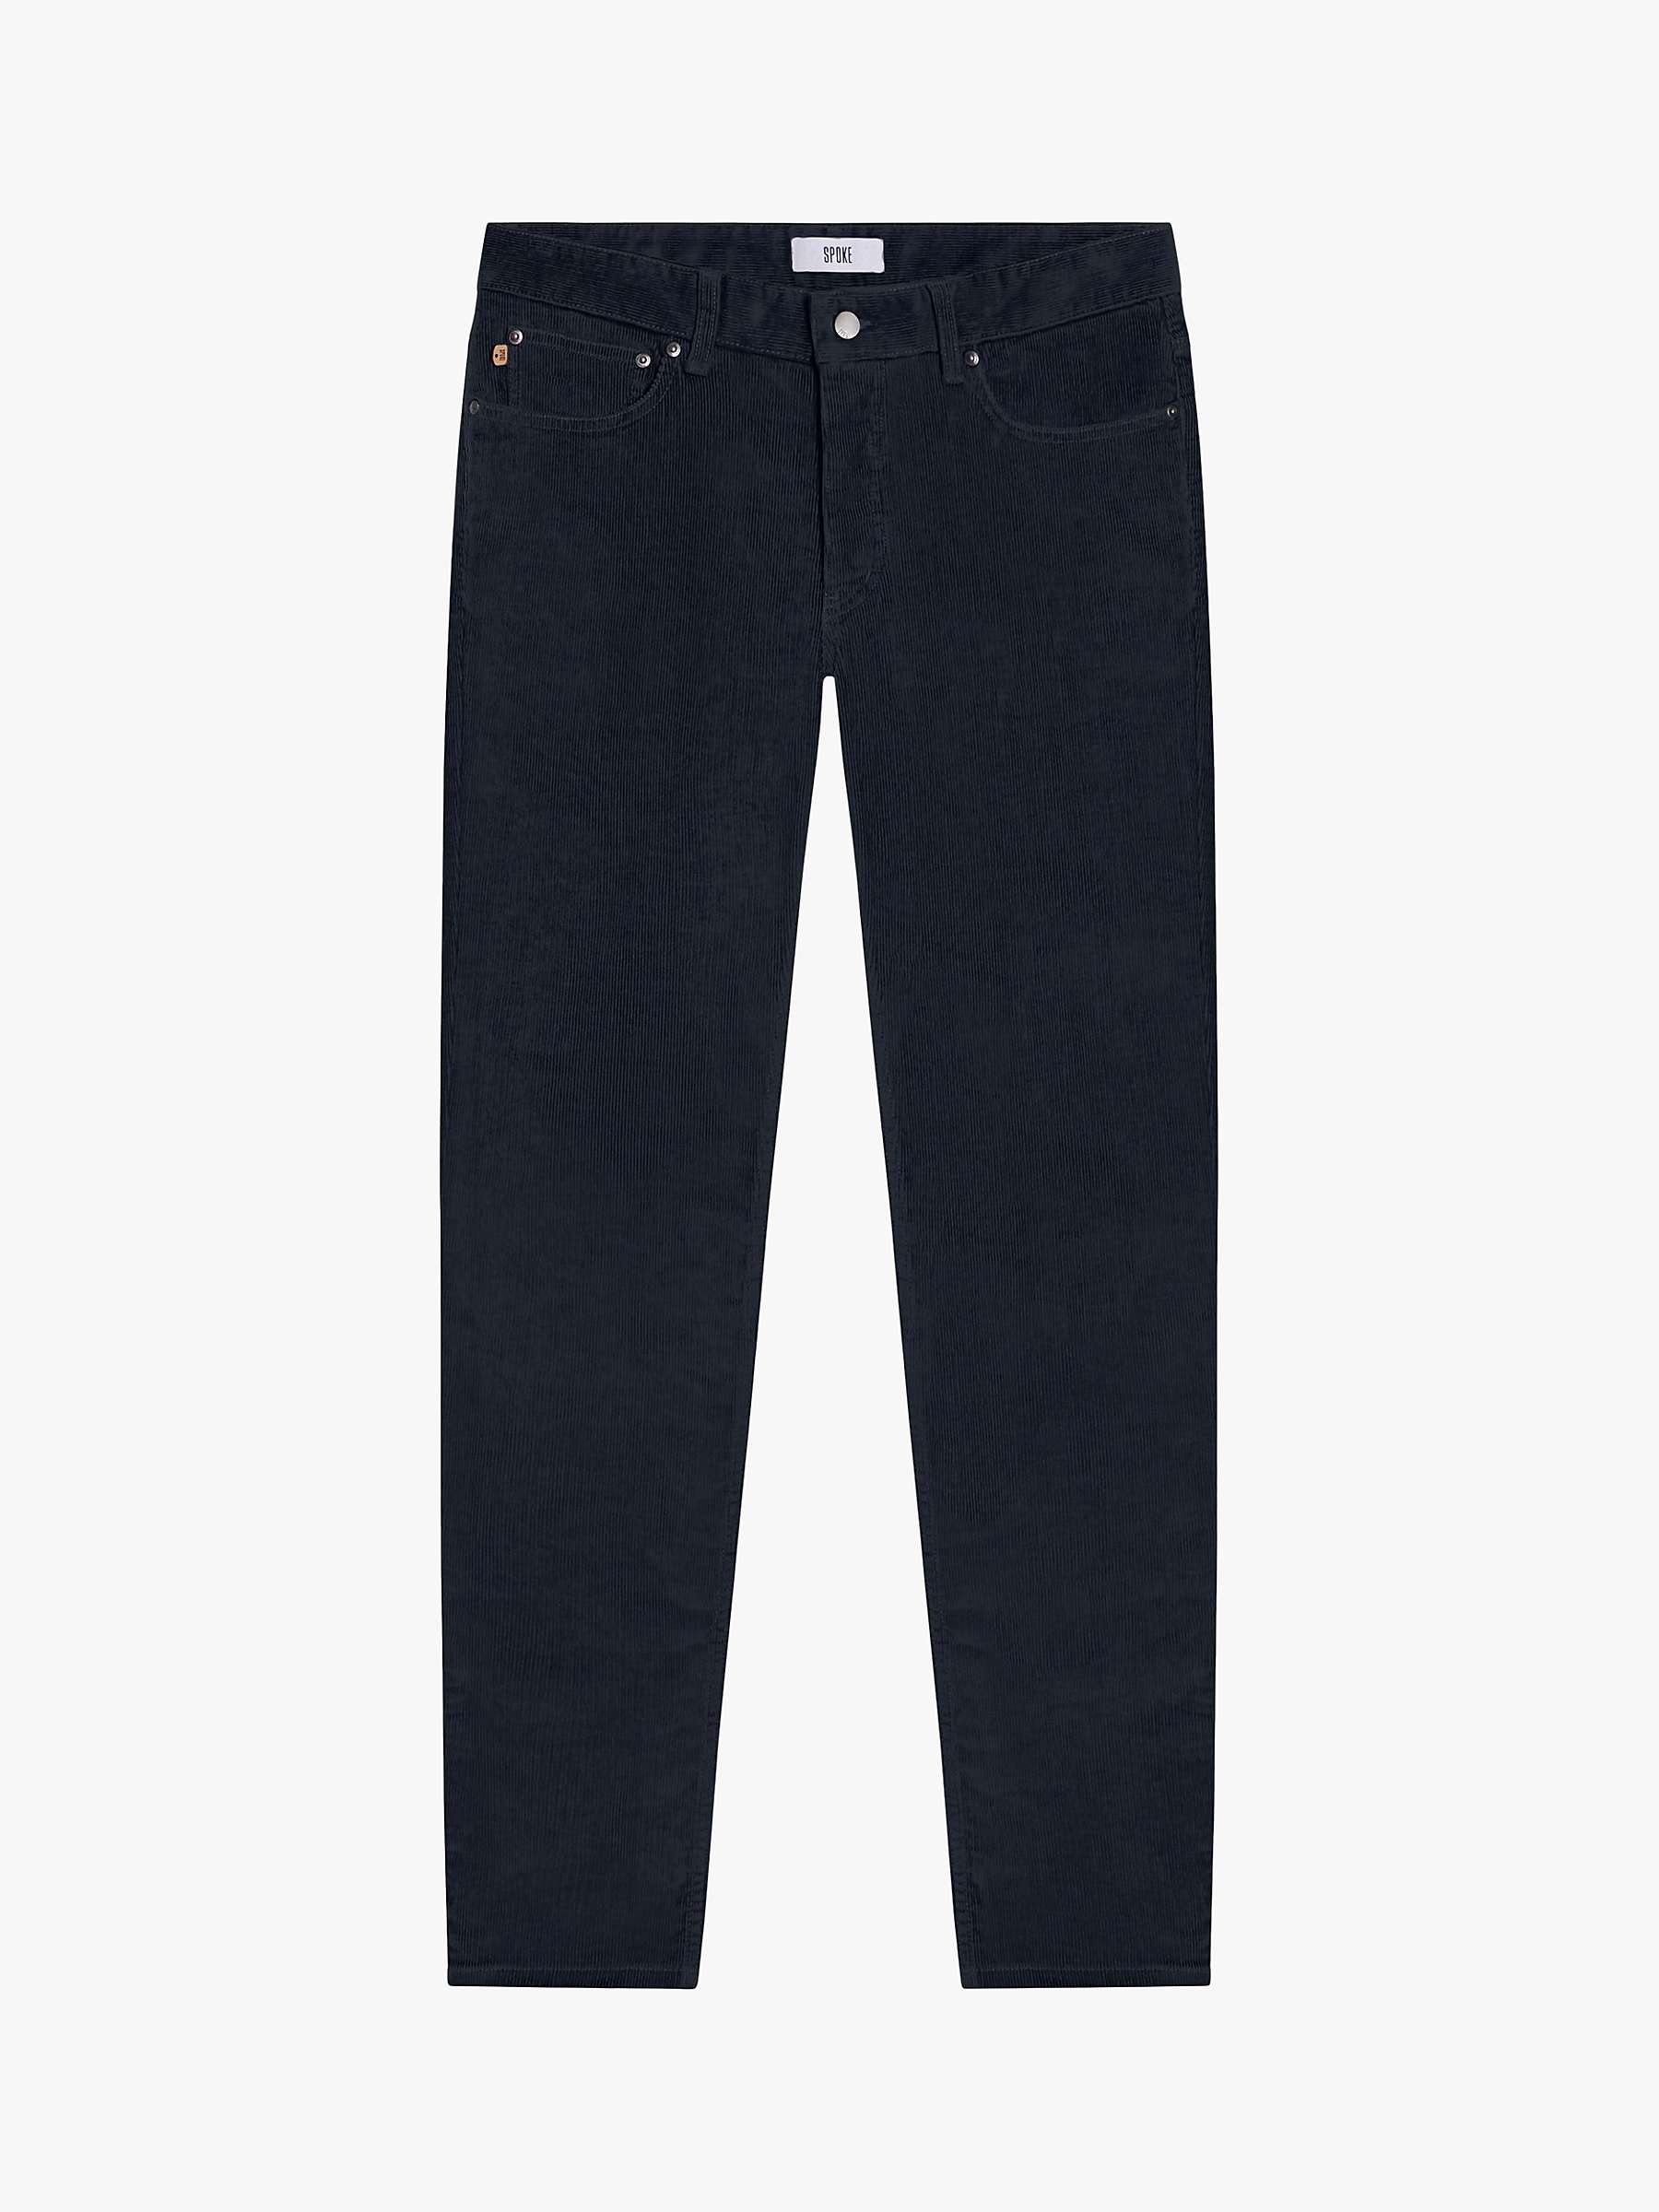 Buy SPOKE Fives Needlecord Fives Build C Broad Thigh Corduroy Trousers Online at johnlewis.com